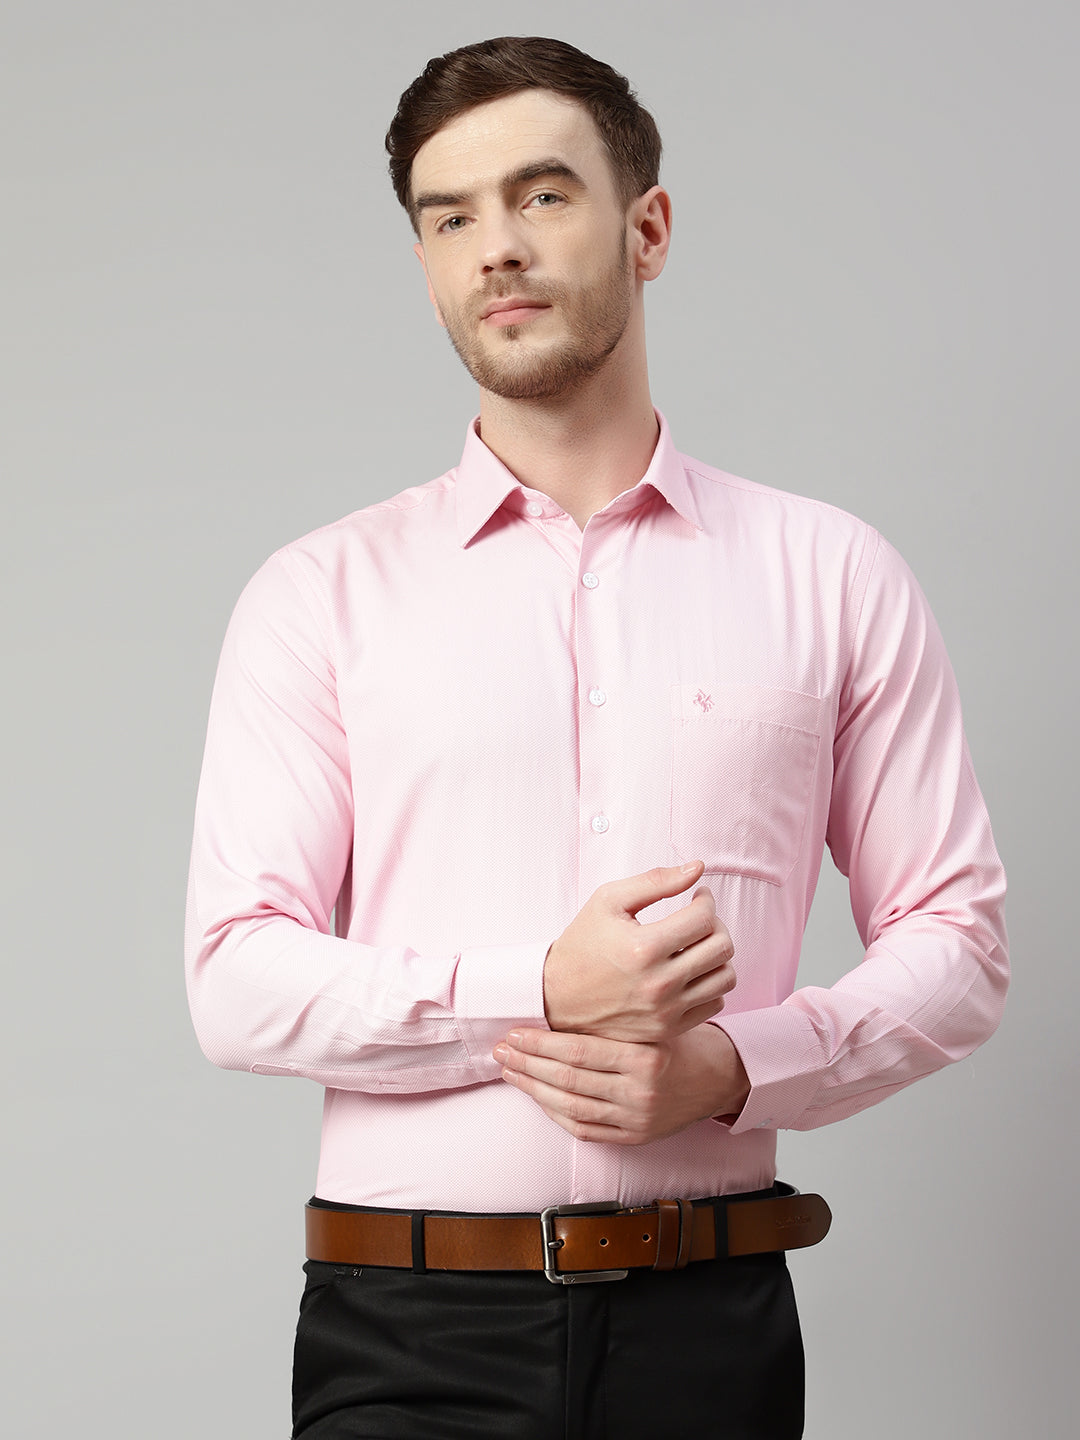 a man wearing a pink shirt and black pants and white shoes Stock Photo by  Icons8